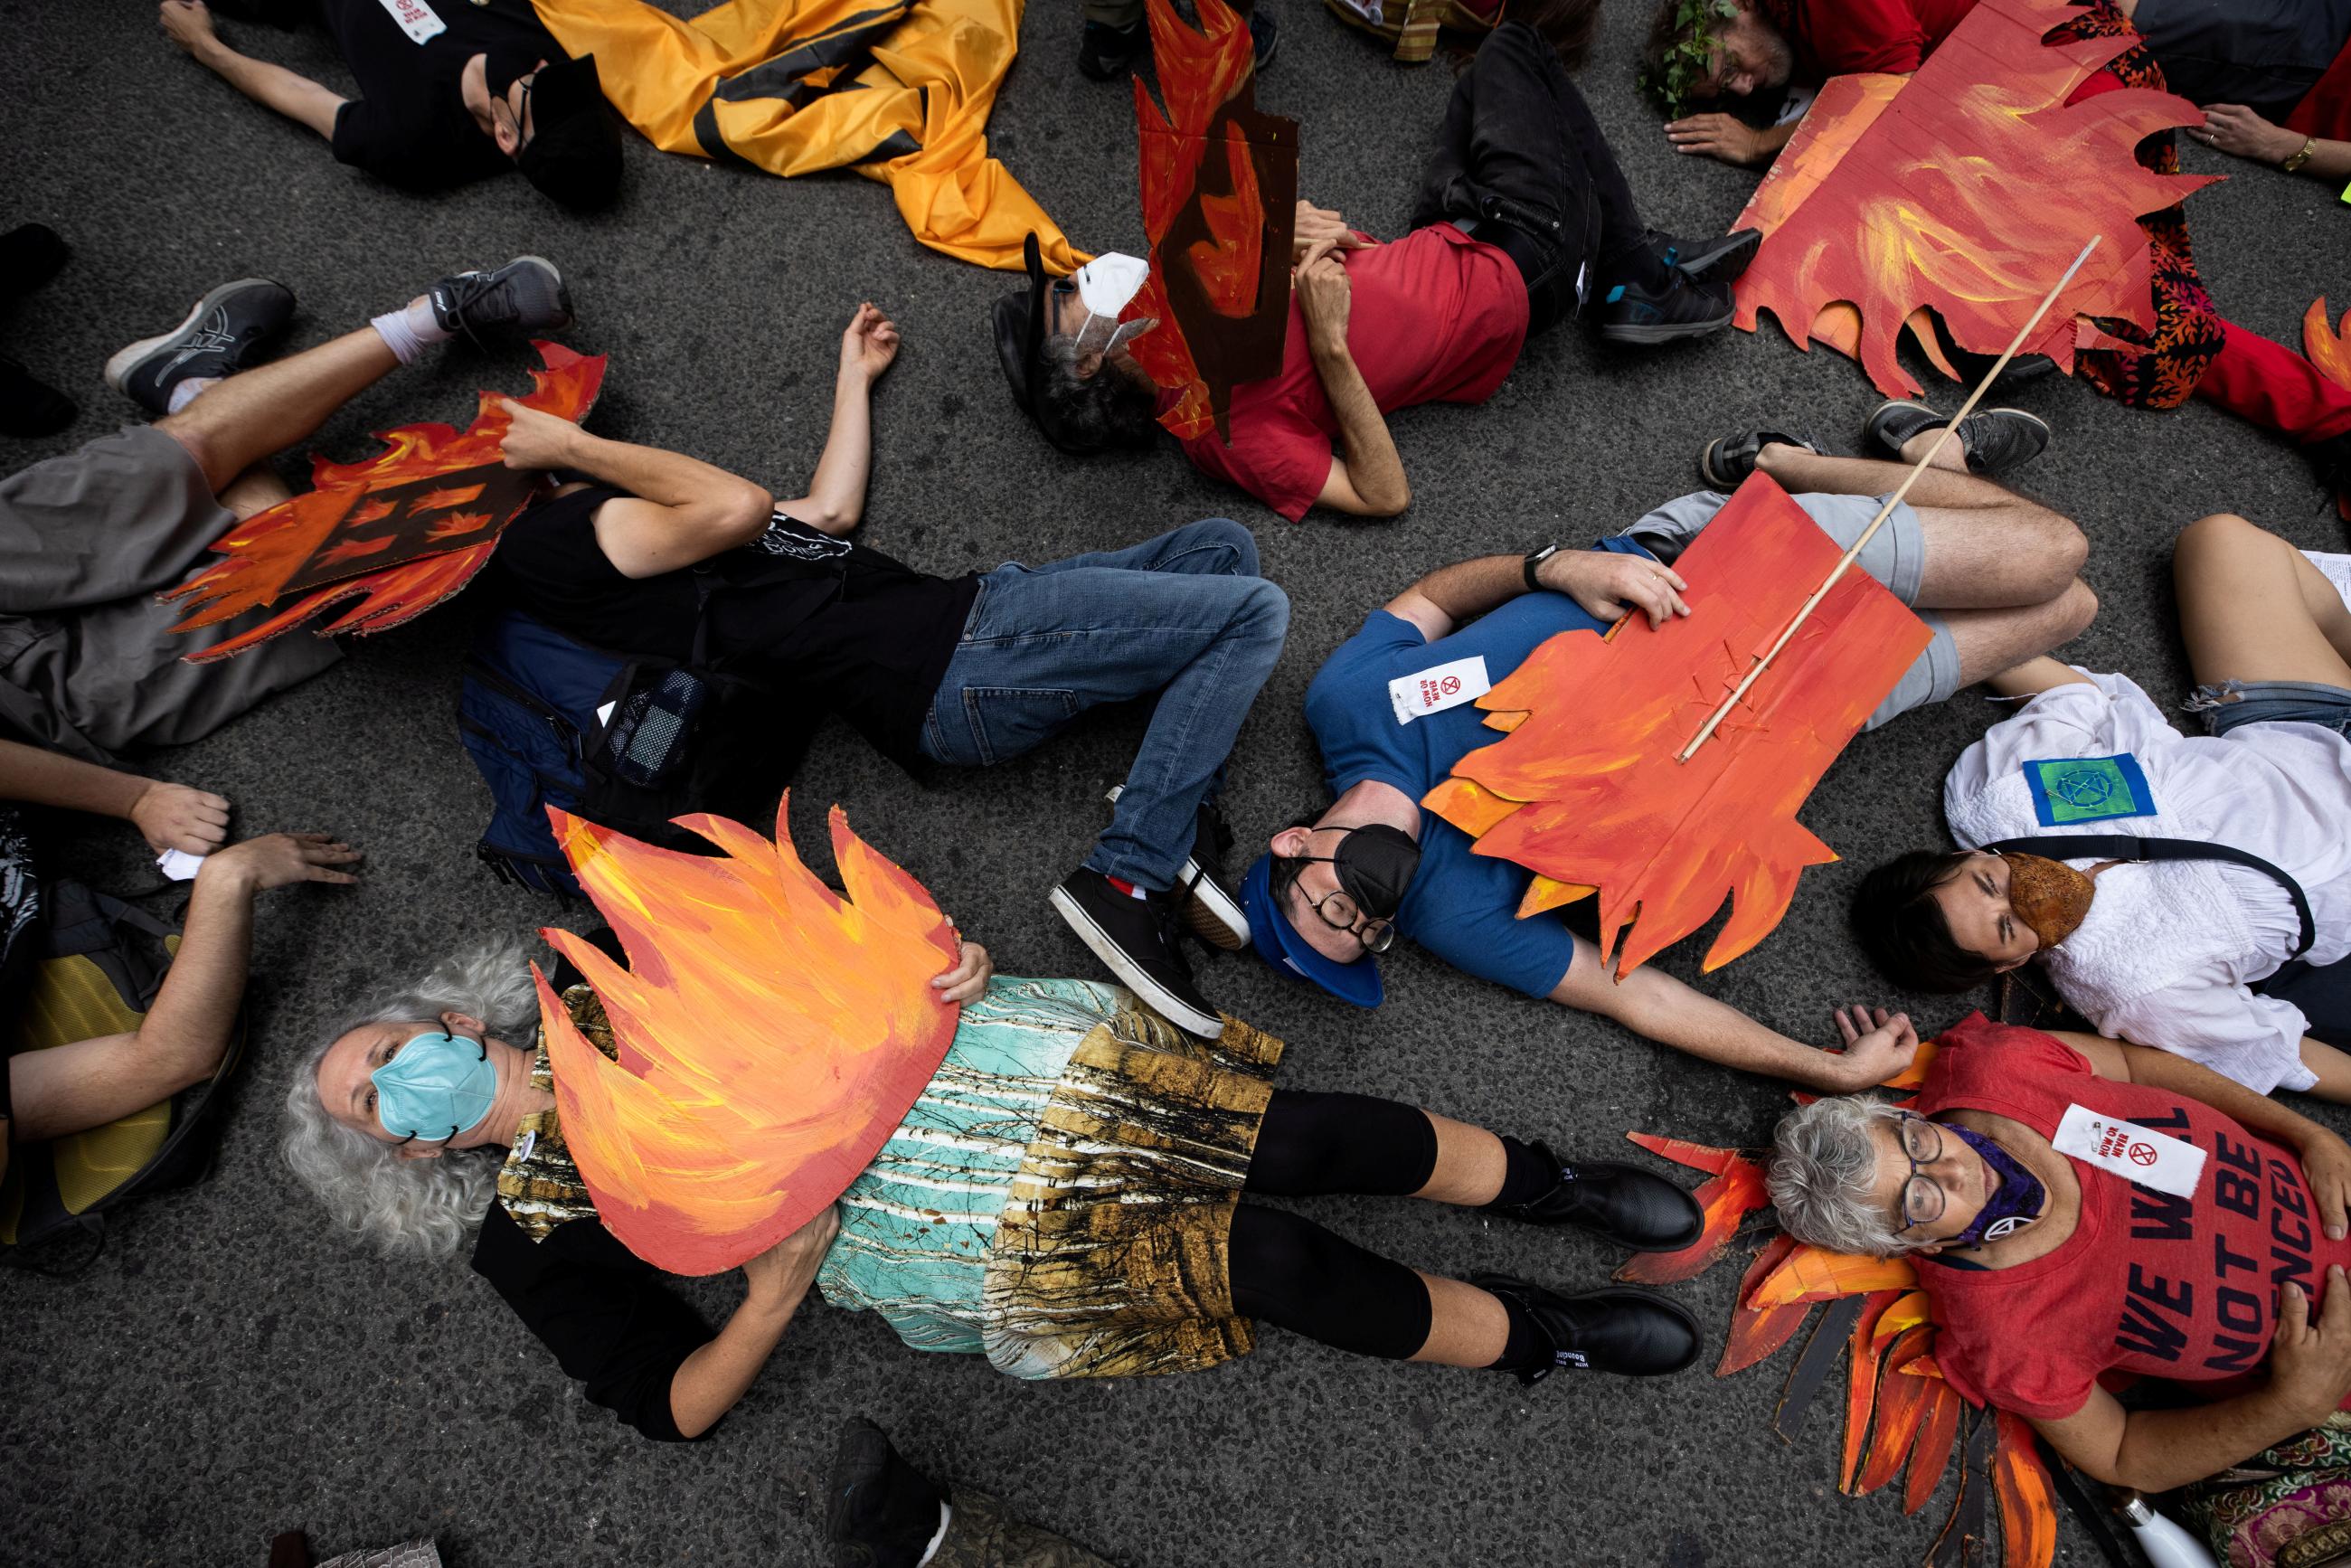 People block a street in Manhattan while pretending to be dead during a nonviolent resistance climate change protest organized by Extinction Rebellion in the Manhattan borough of New York City, on September 17, 2021.